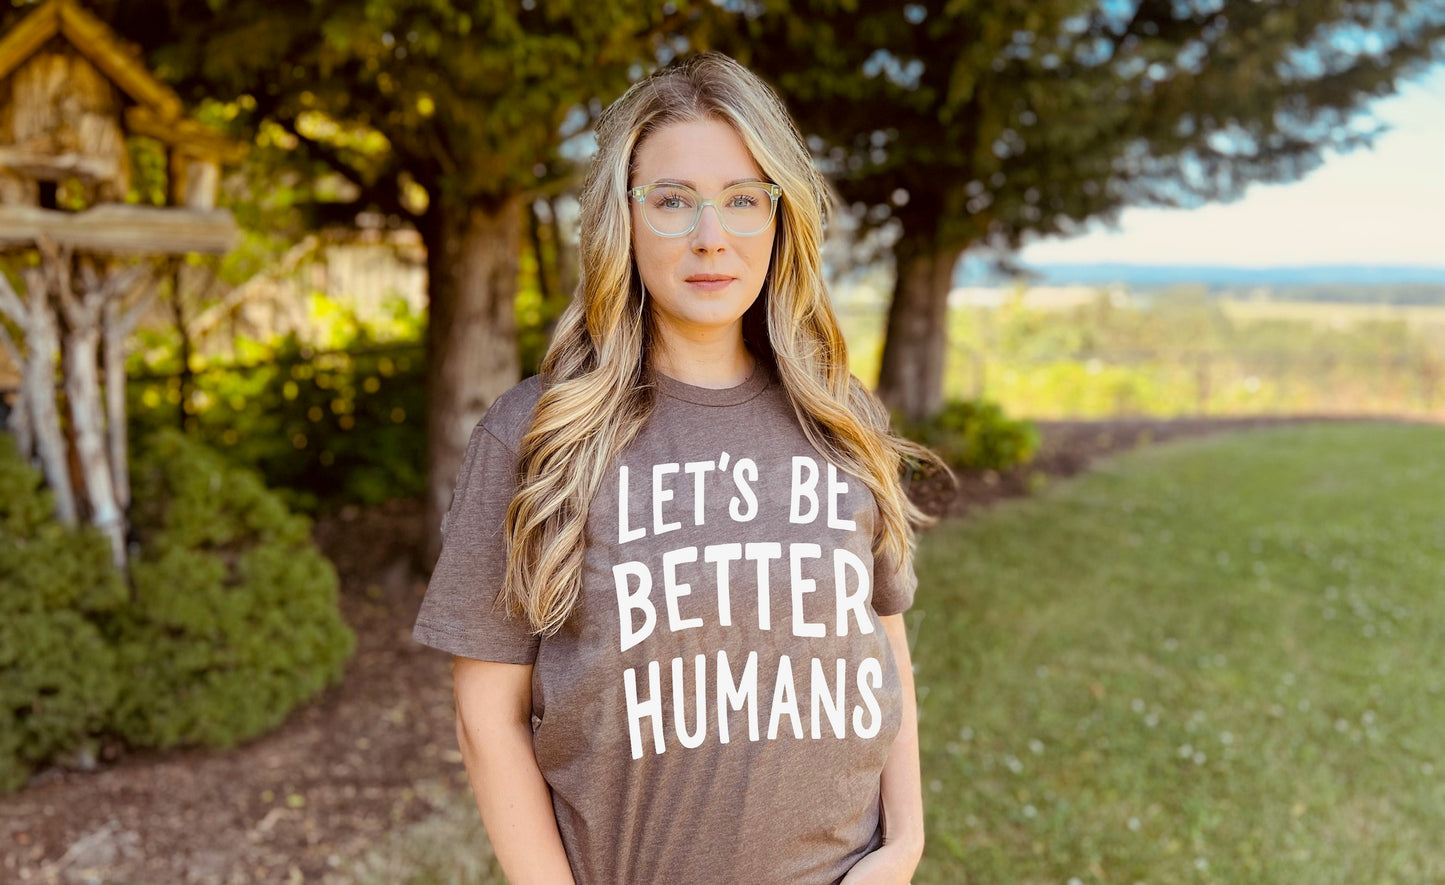 Let's Be Better Humans